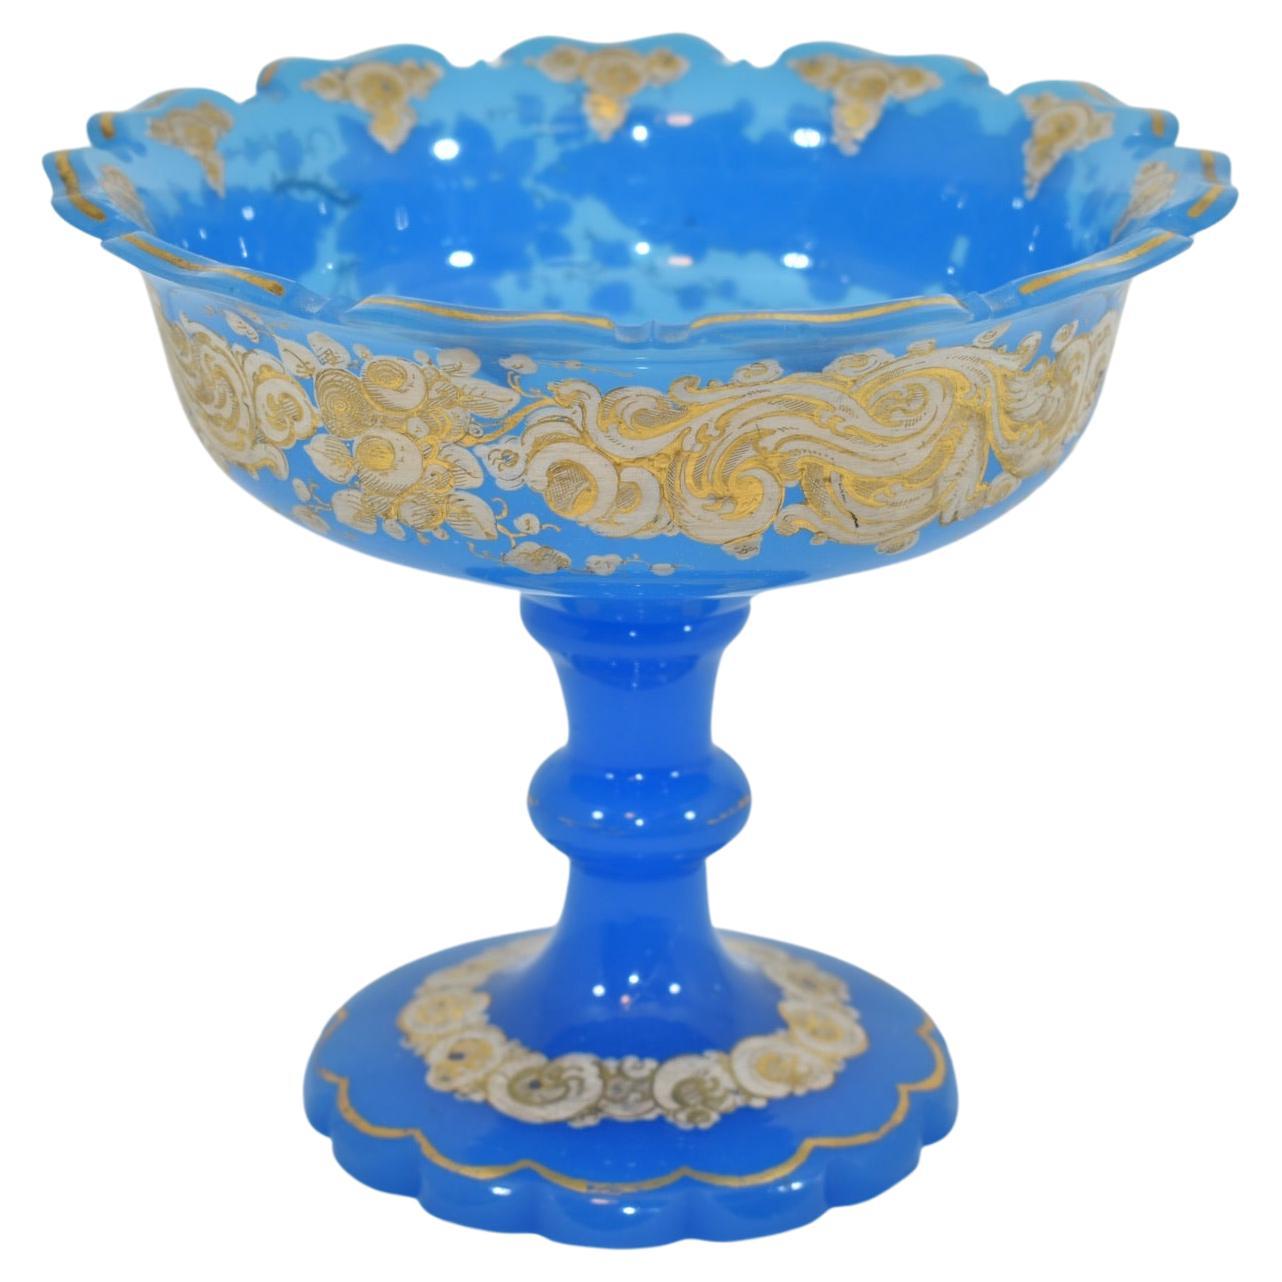 Antique Blue Opaline Enameled Glass Tazza Bowl, 19th Century For Sale